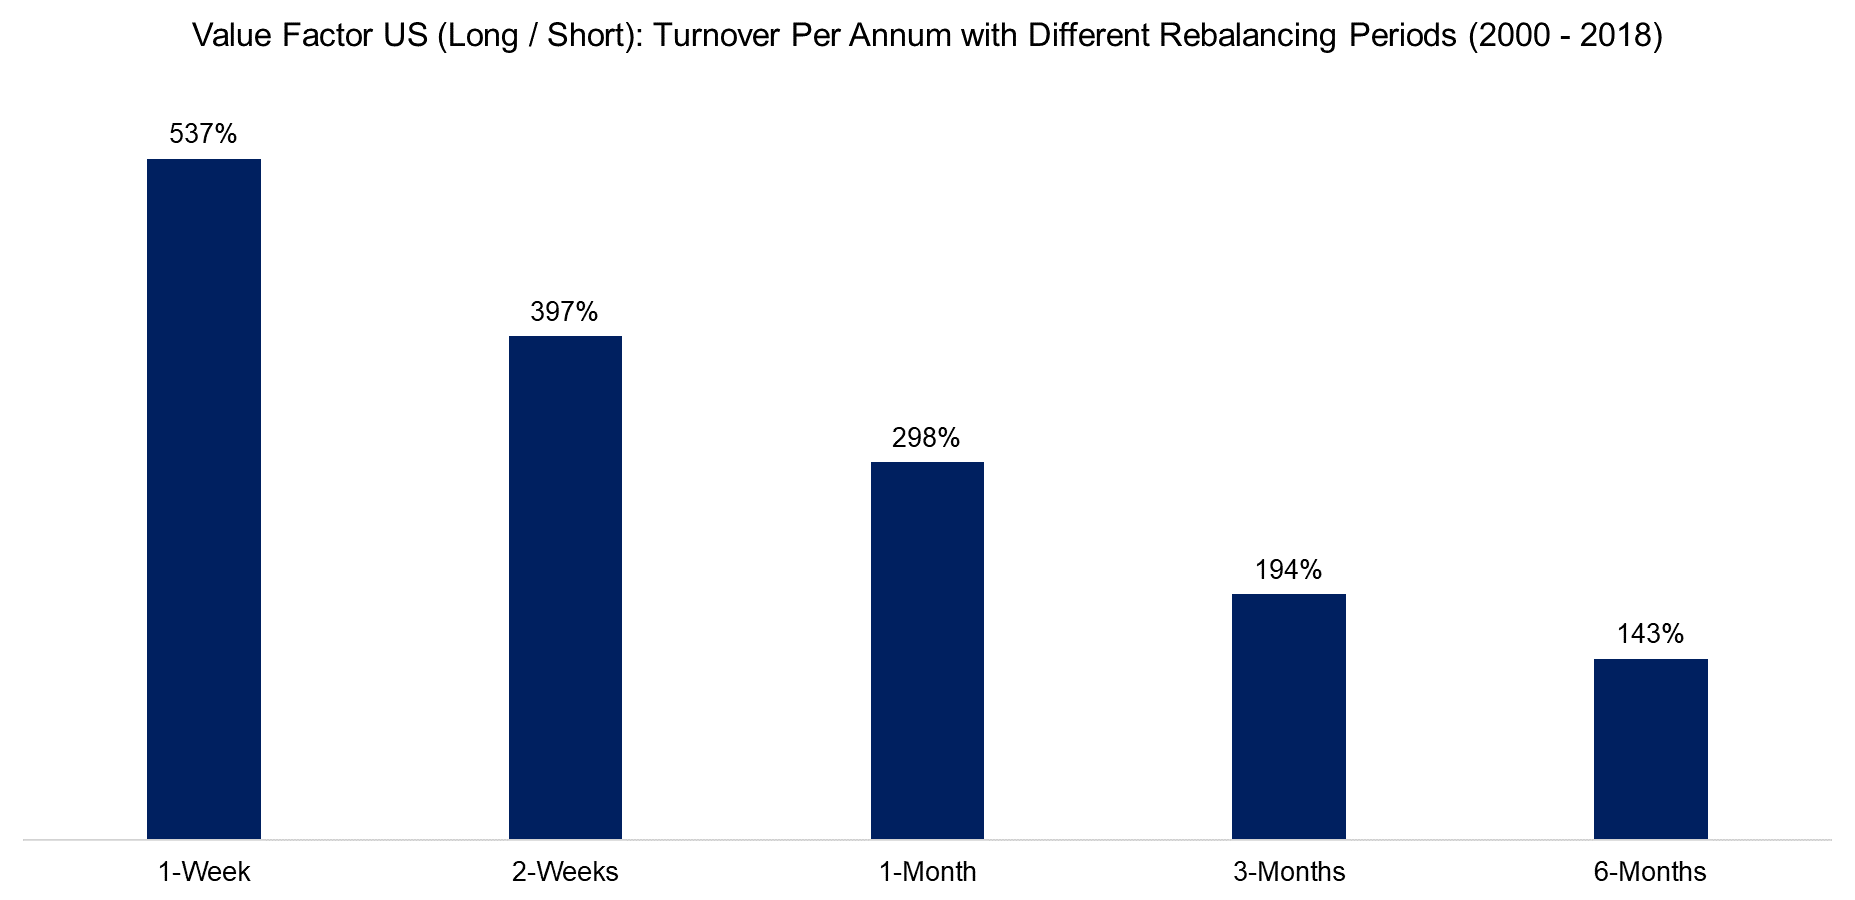 Value Factor US (Long Short) Turnover Per Annum with Different Rebalancing Periods